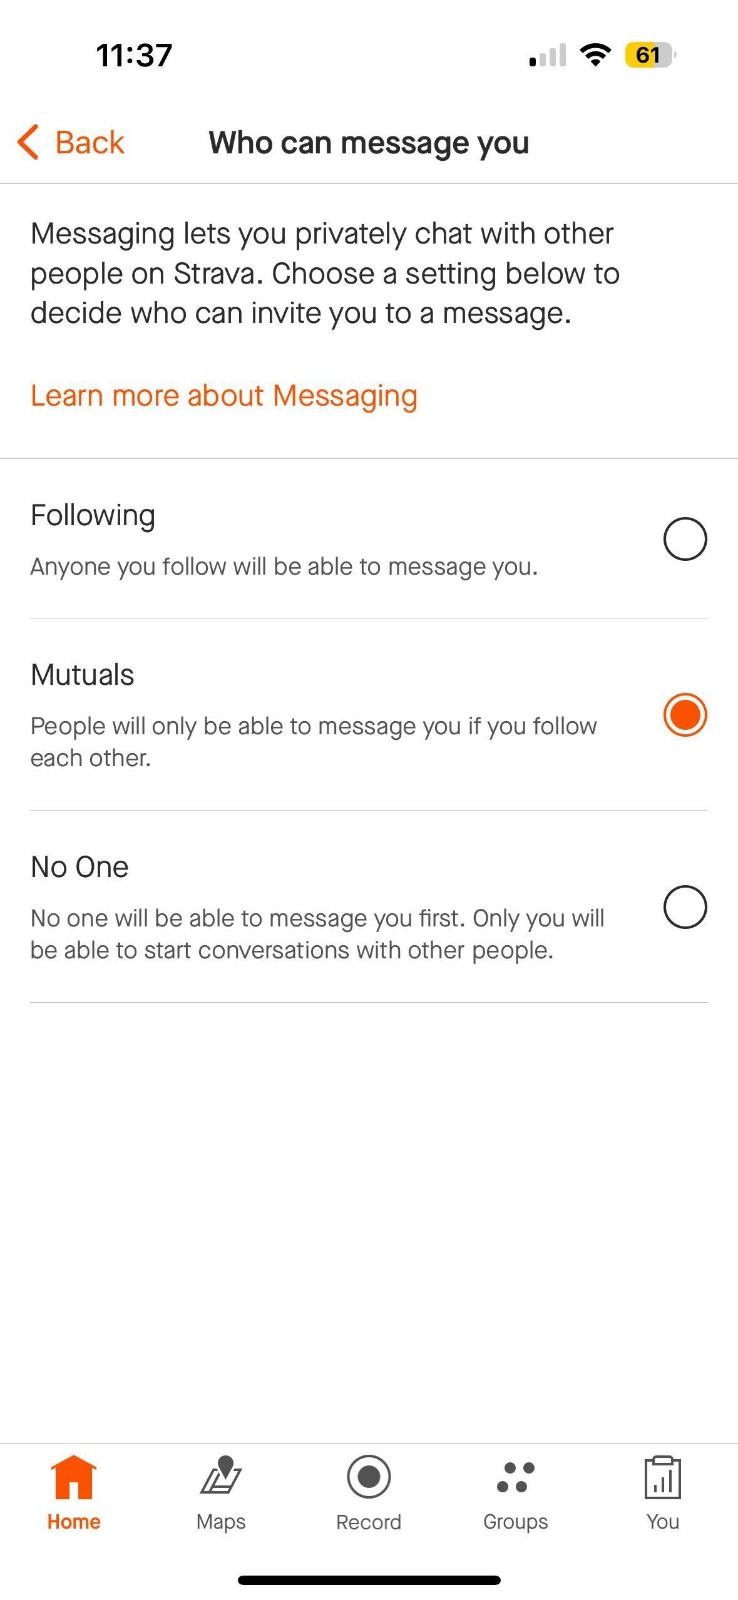 Screenshot of privacy options for messages on Stava. Text gives three messaging options: Following: Anyone you follow will be able to message you. Mutuals: People will only be able to message you if you follow each other. No One: No one will be able to message you first. Only you will be able to start conversations with other people.